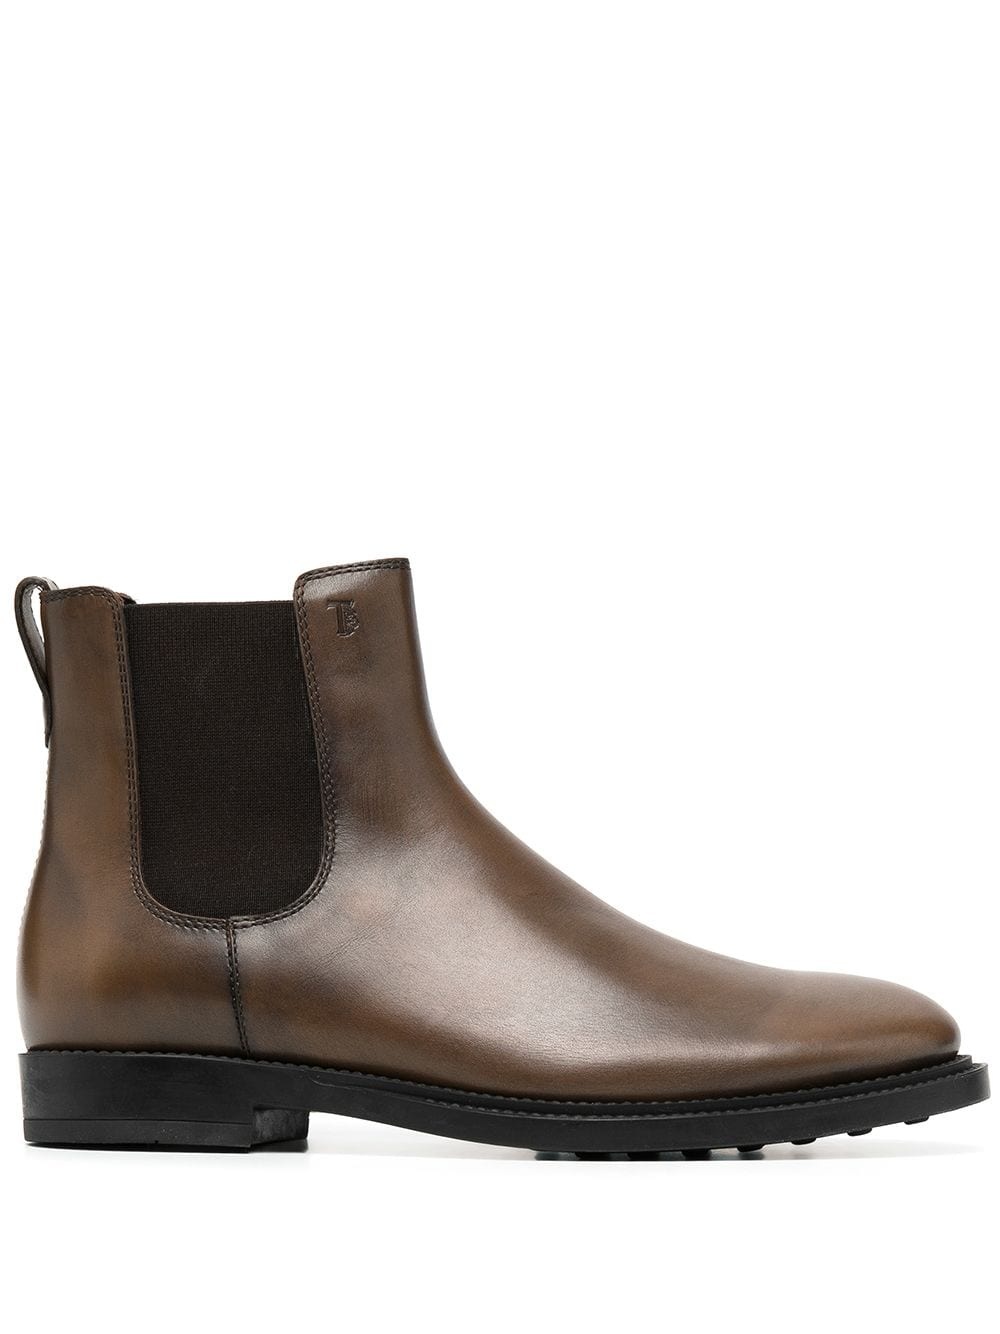 round toe chelsea boots - 1